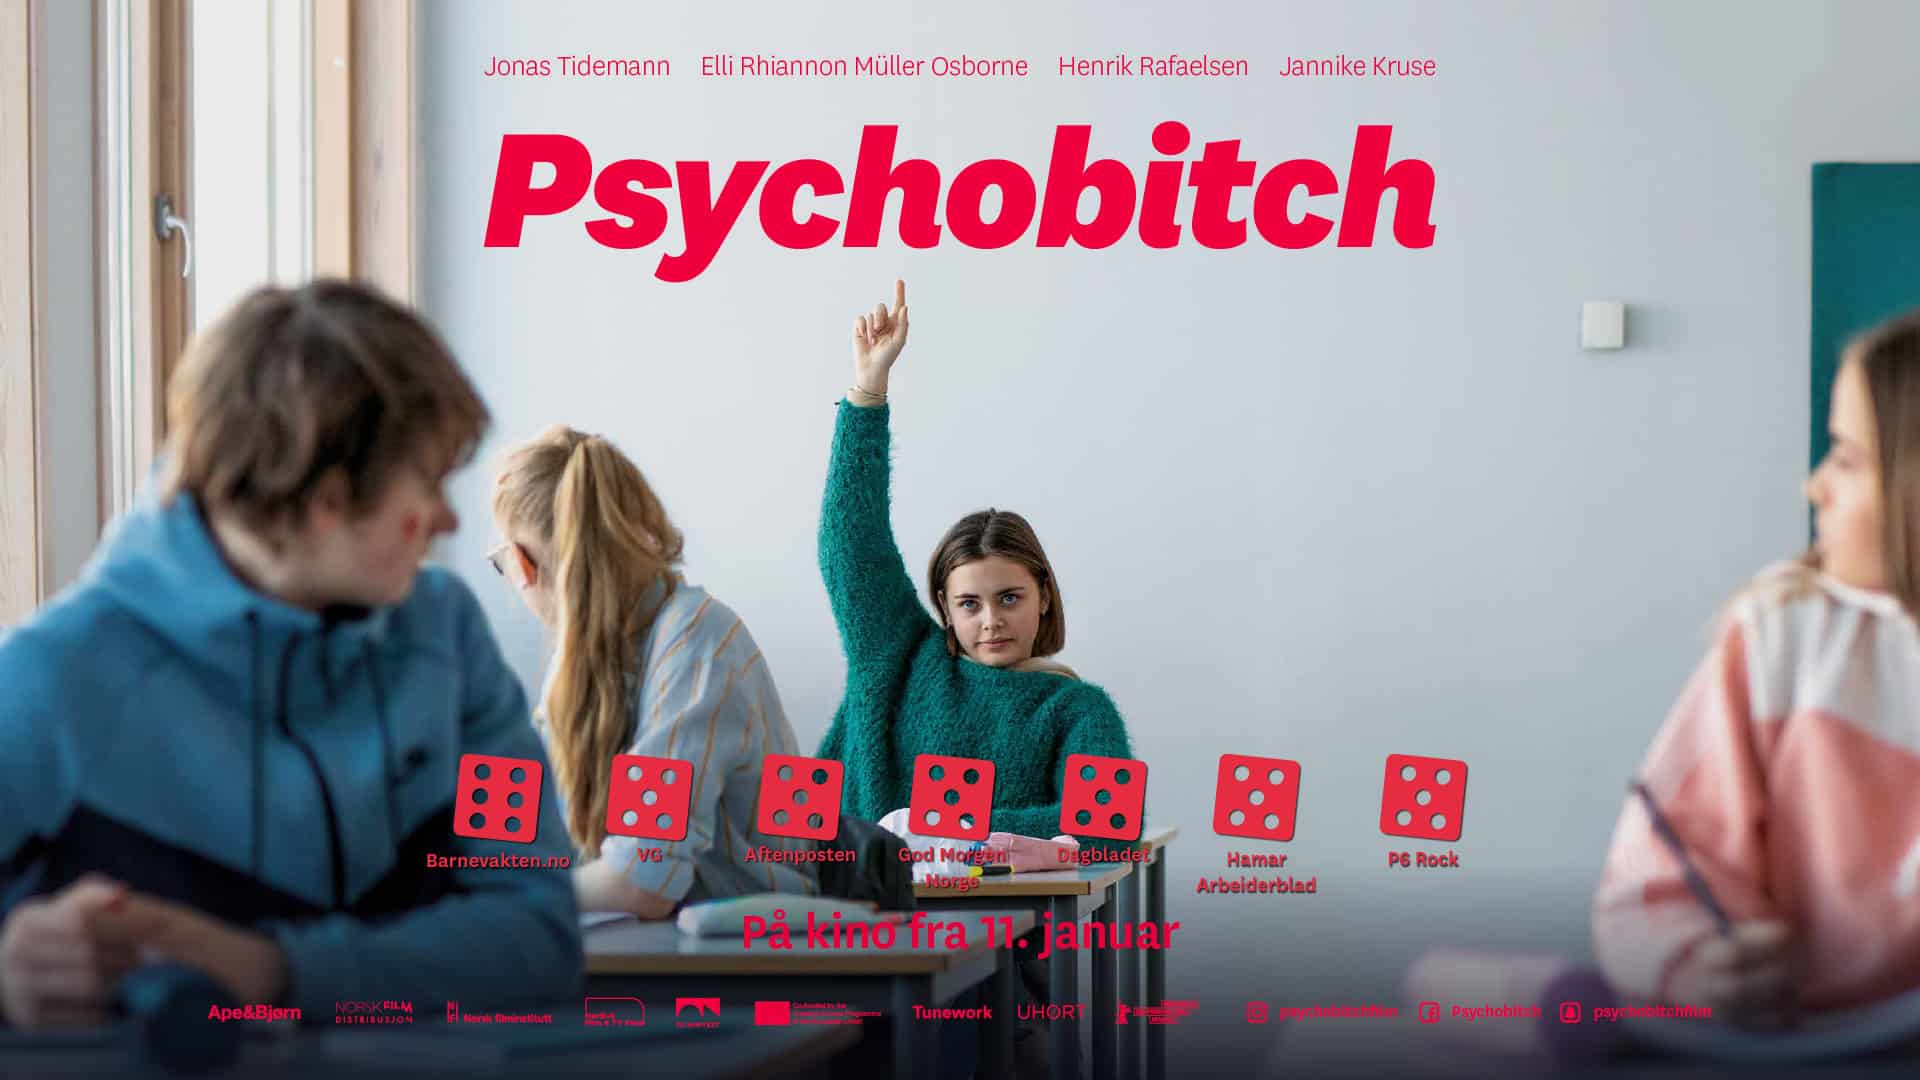 A girl putting her hand in the air in a classroom on the promotional poster for movie Psykobitch.